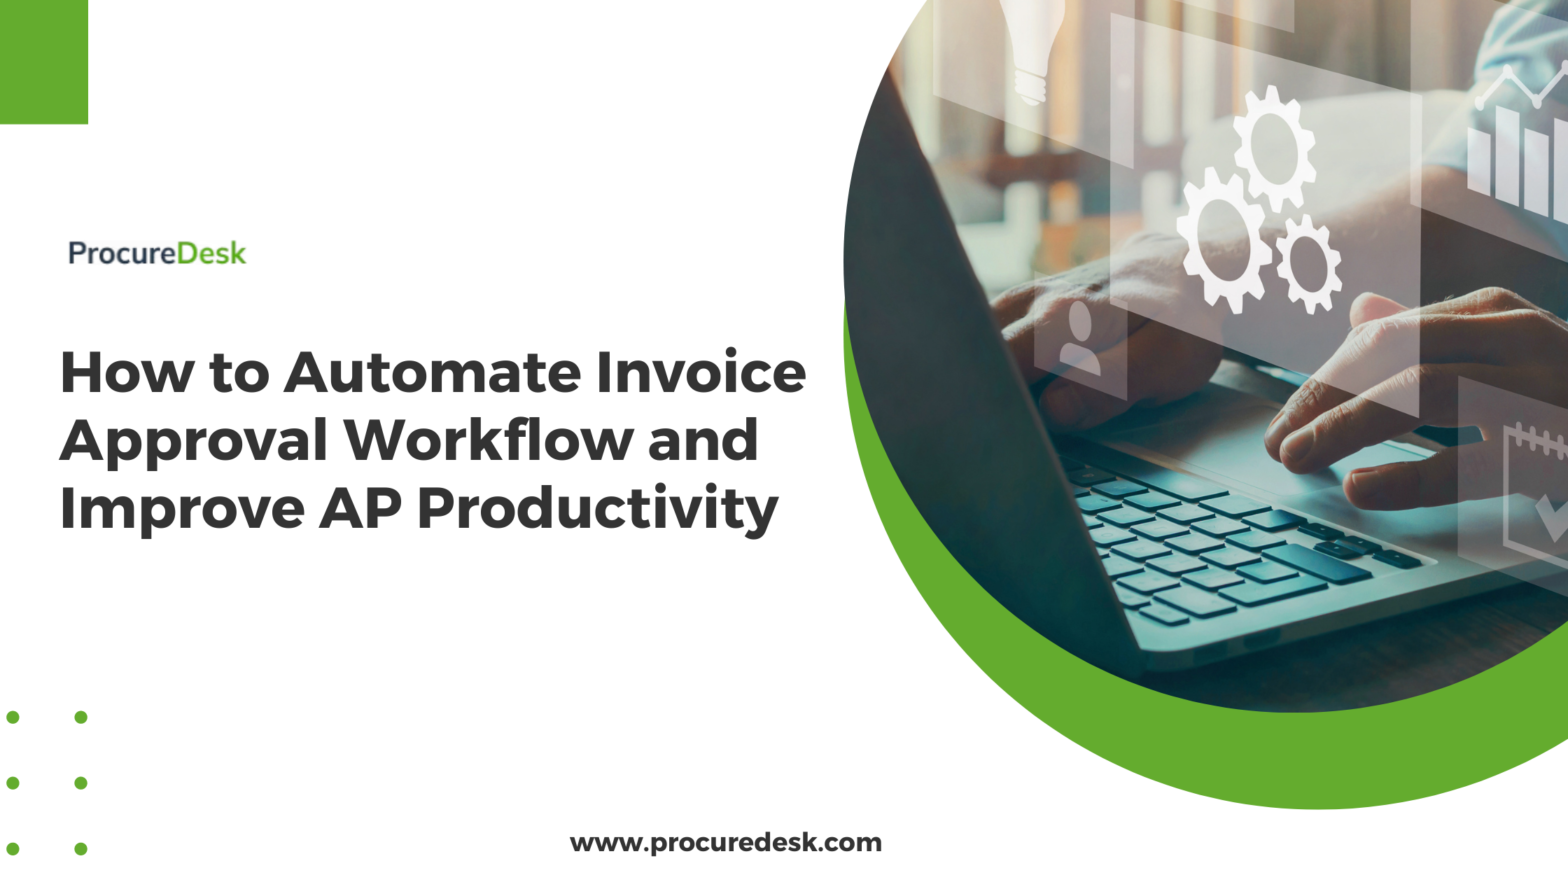 How to Automate Invoice Approval Workflow and Improve AP Productivity